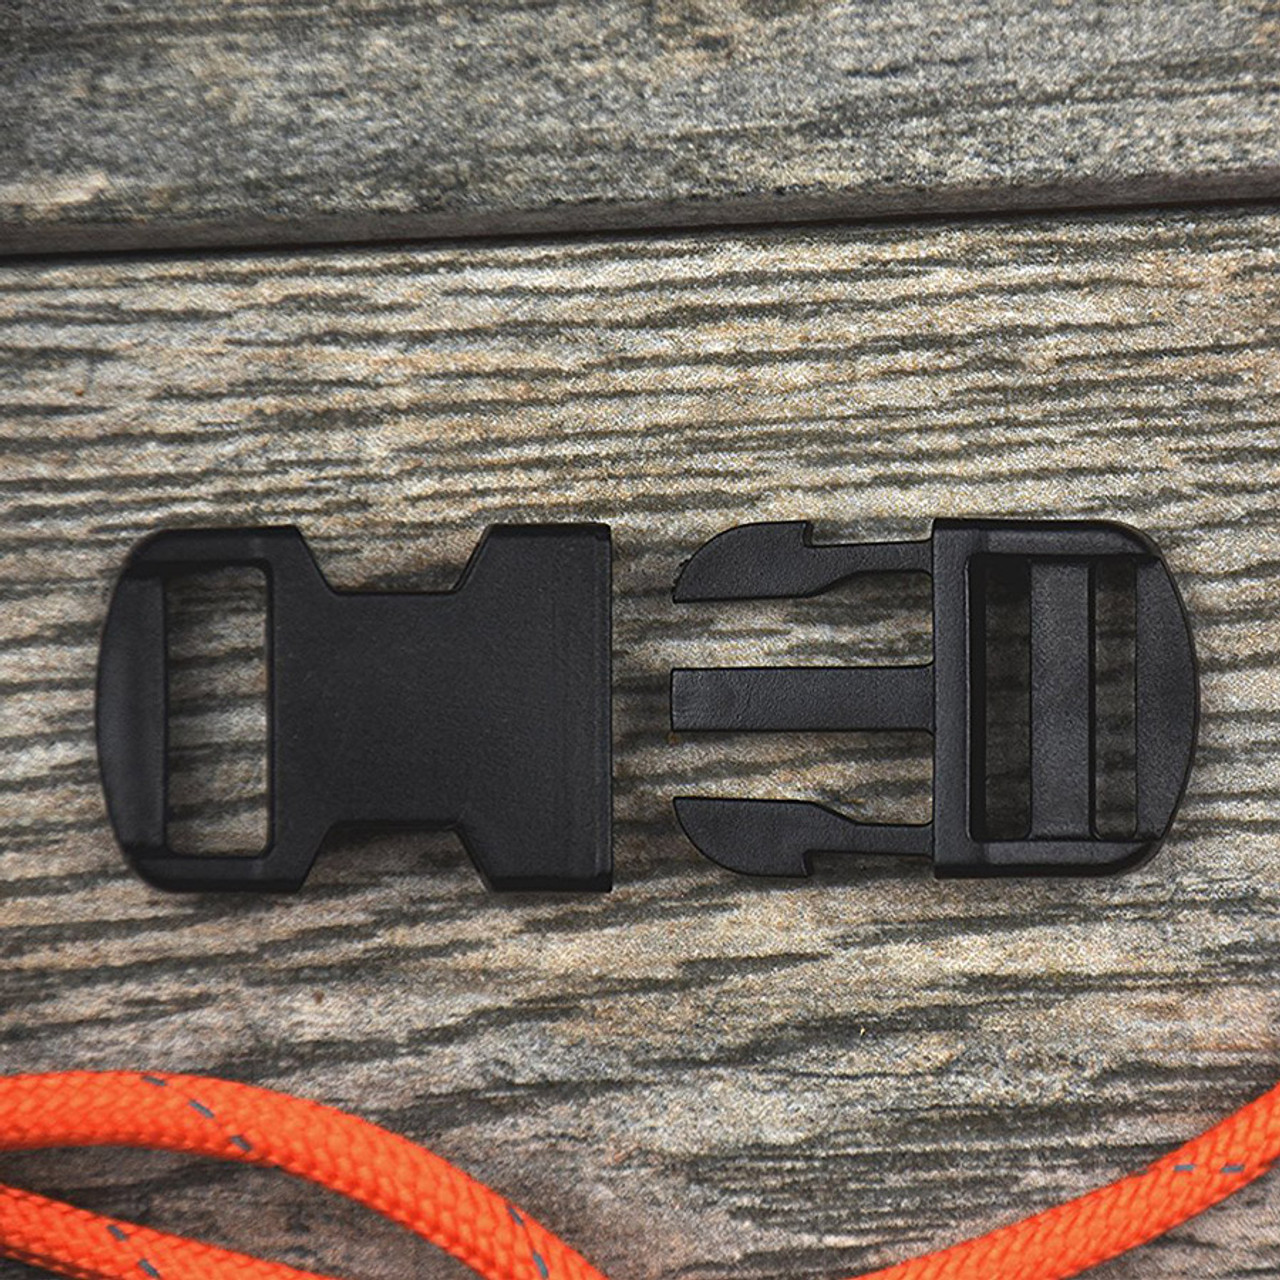 Buy Paracord Clips online